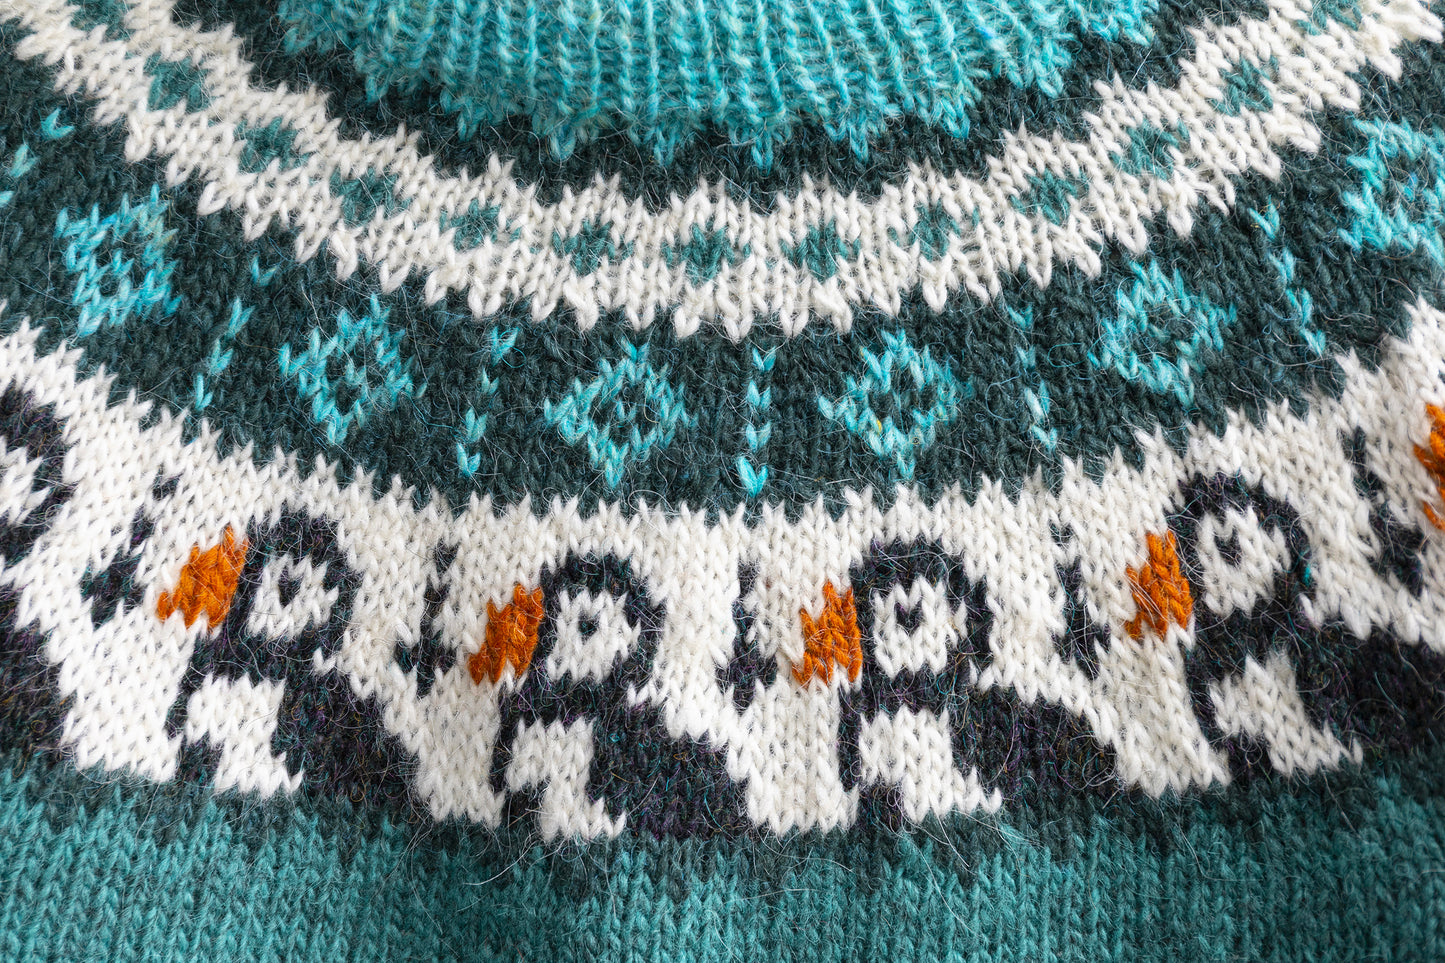 the yore of Turquoise, white and black pure Icelandic wool hand-knitted lopapeysa sweater in Puffins knitting pattern